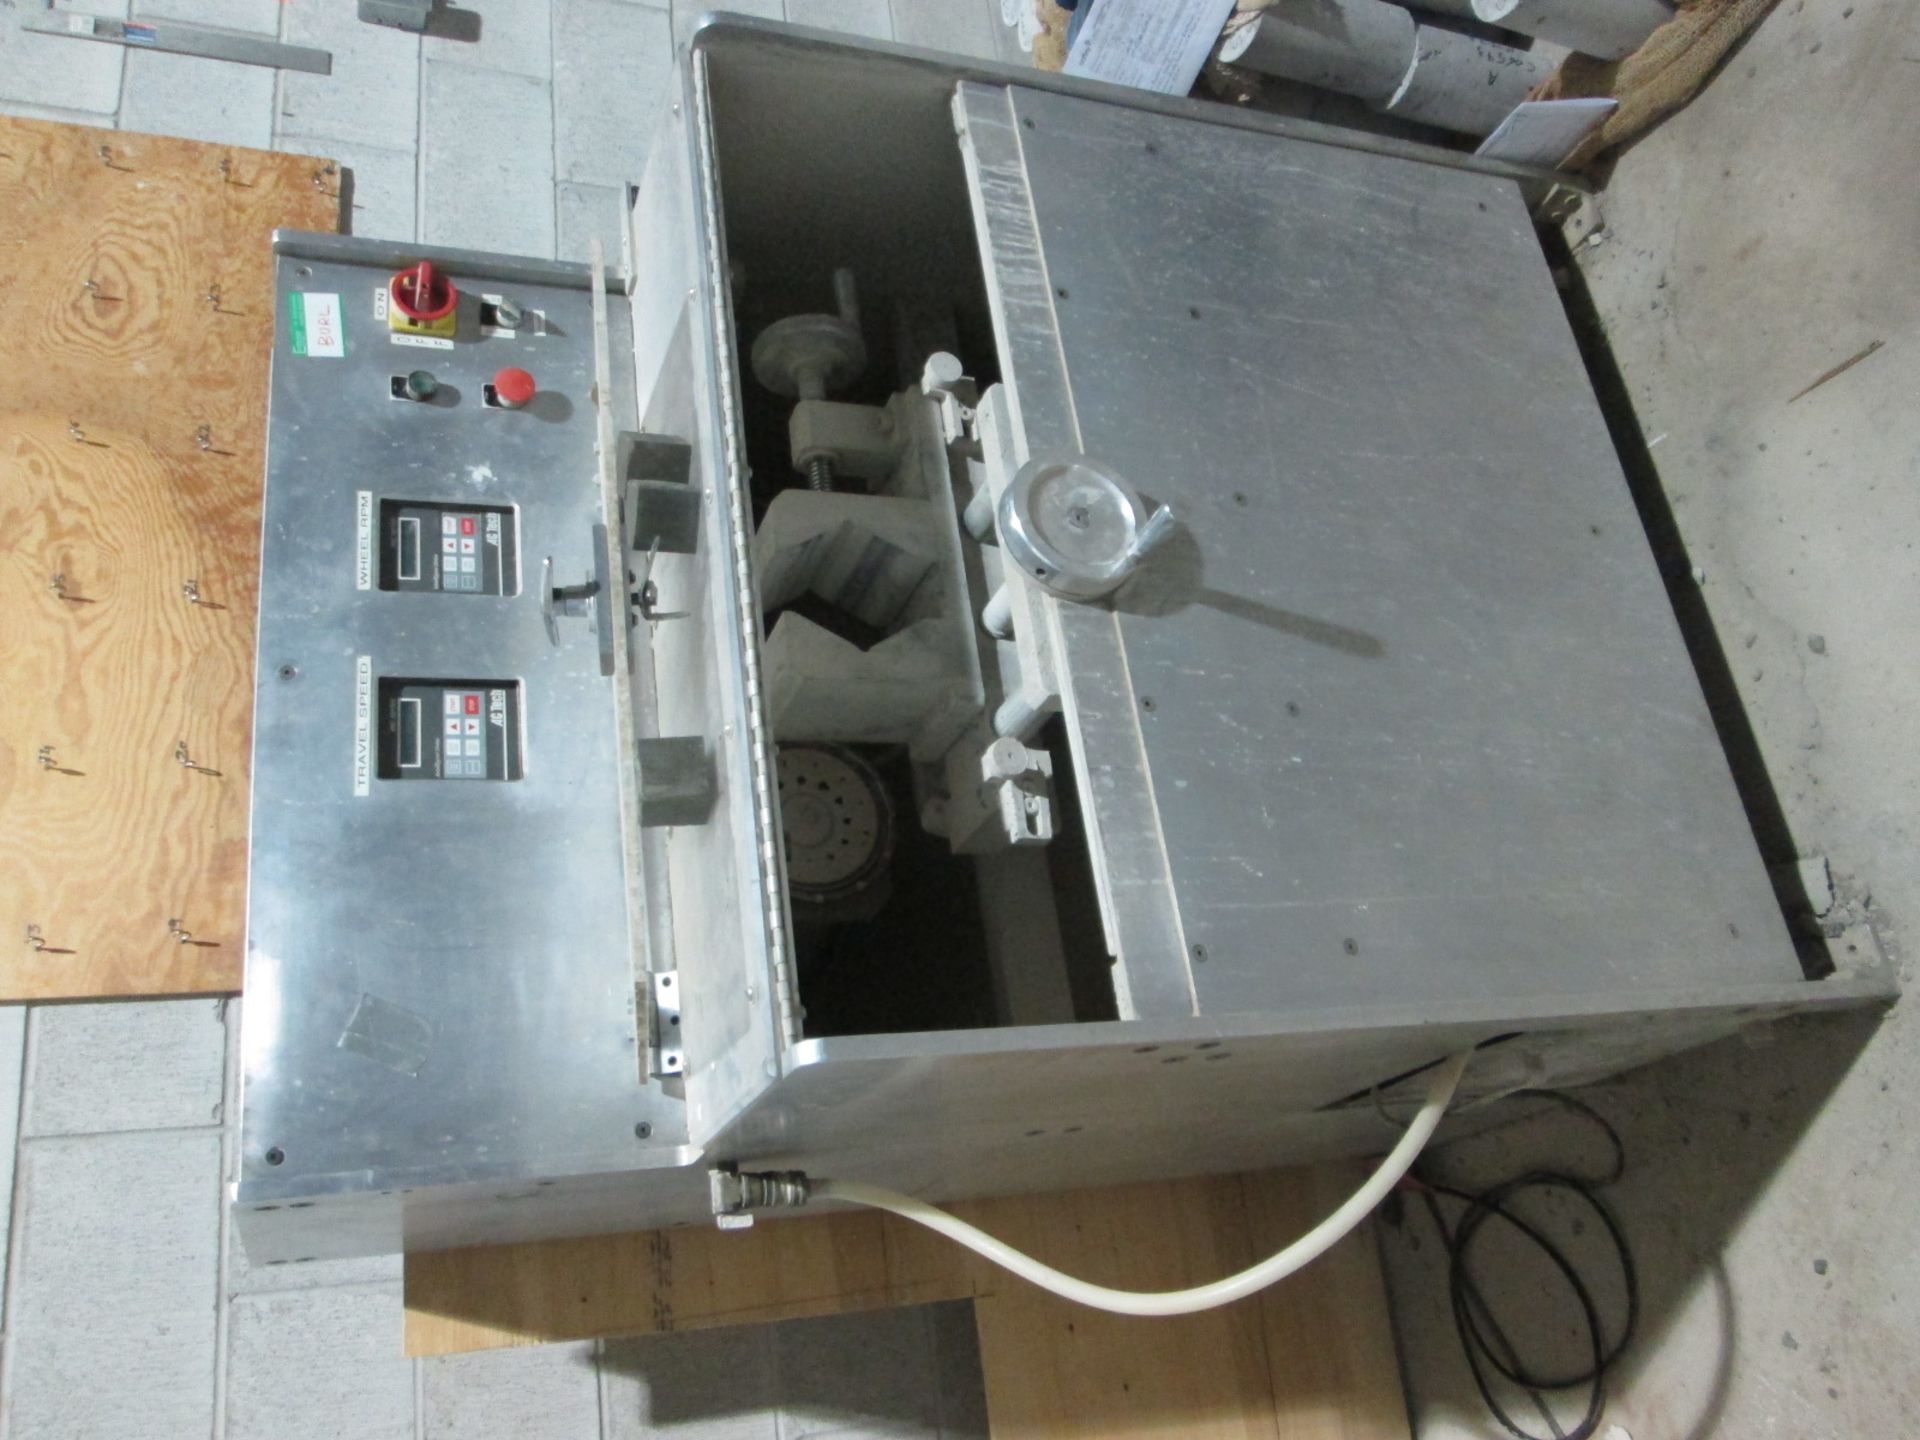 MFG UNKNOWN CONCRETE TEST CYLINDER GRINDER (SOLD BY PHOTO - LOCATED IN BURLINGTON, ON)